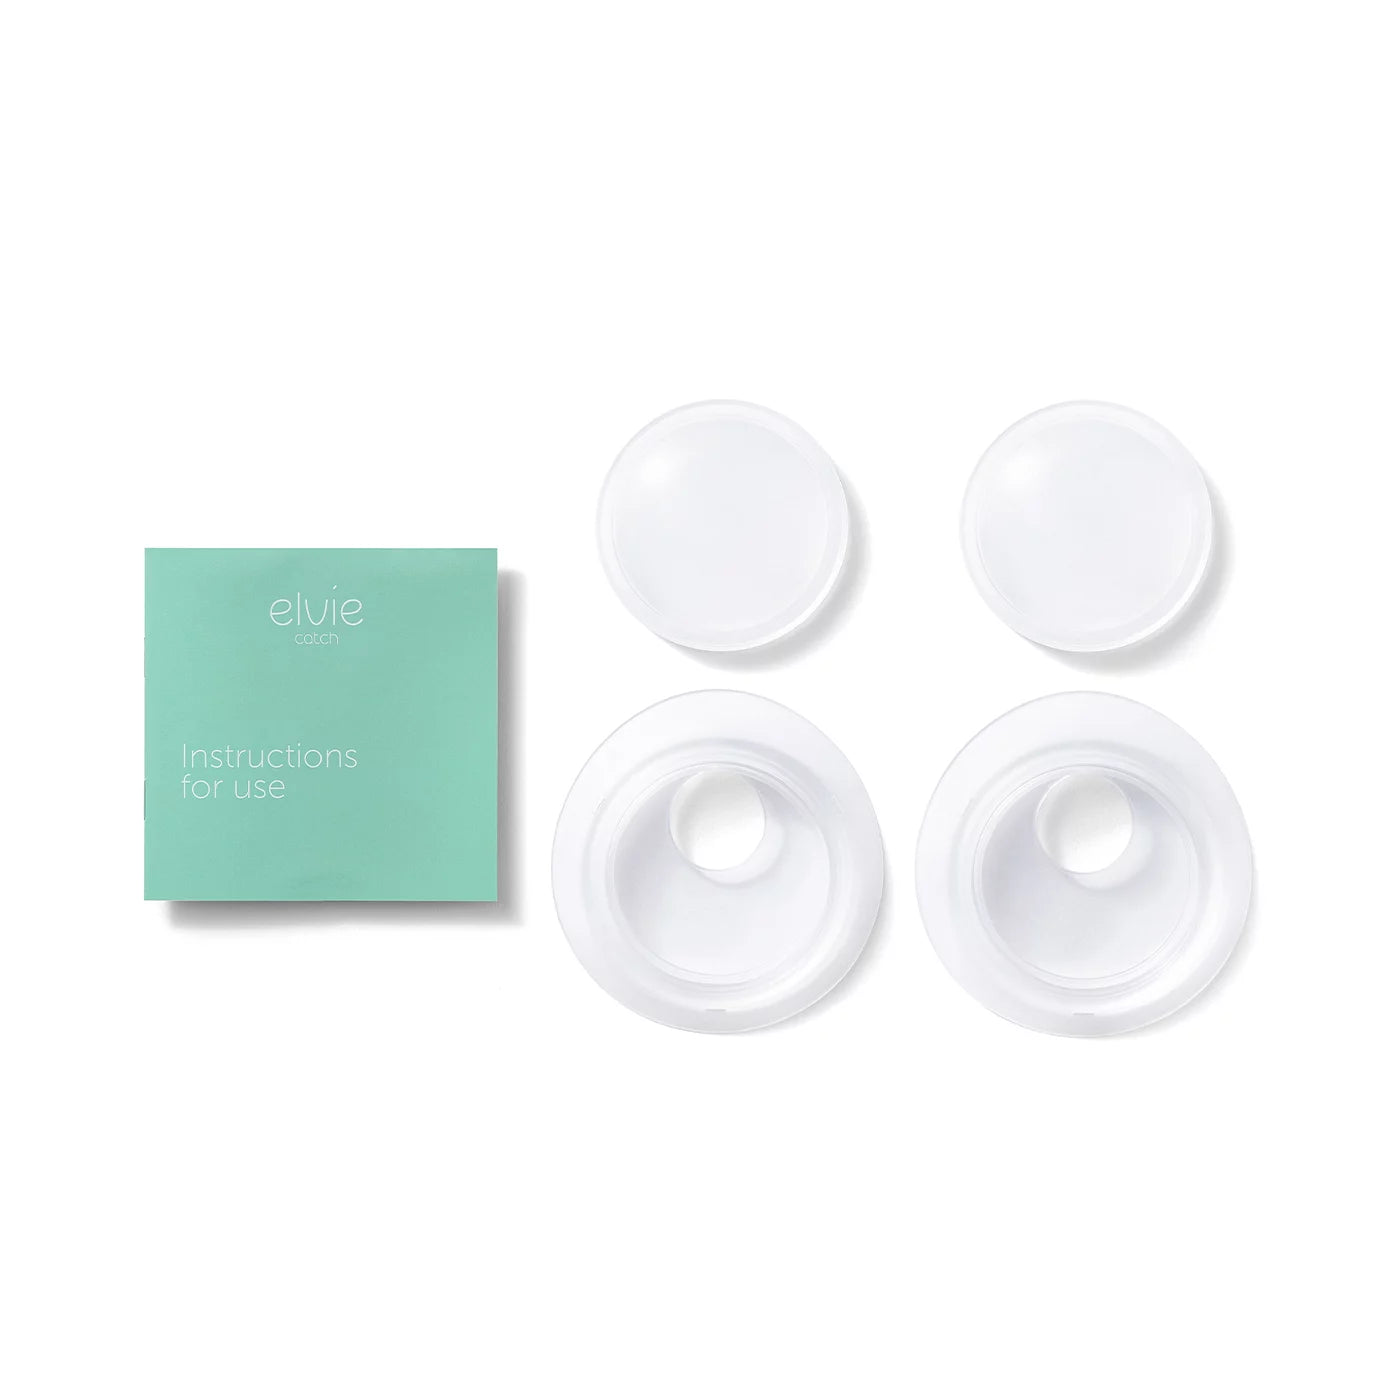 Elvie Catch Silicone Breast Milk Collection Cups